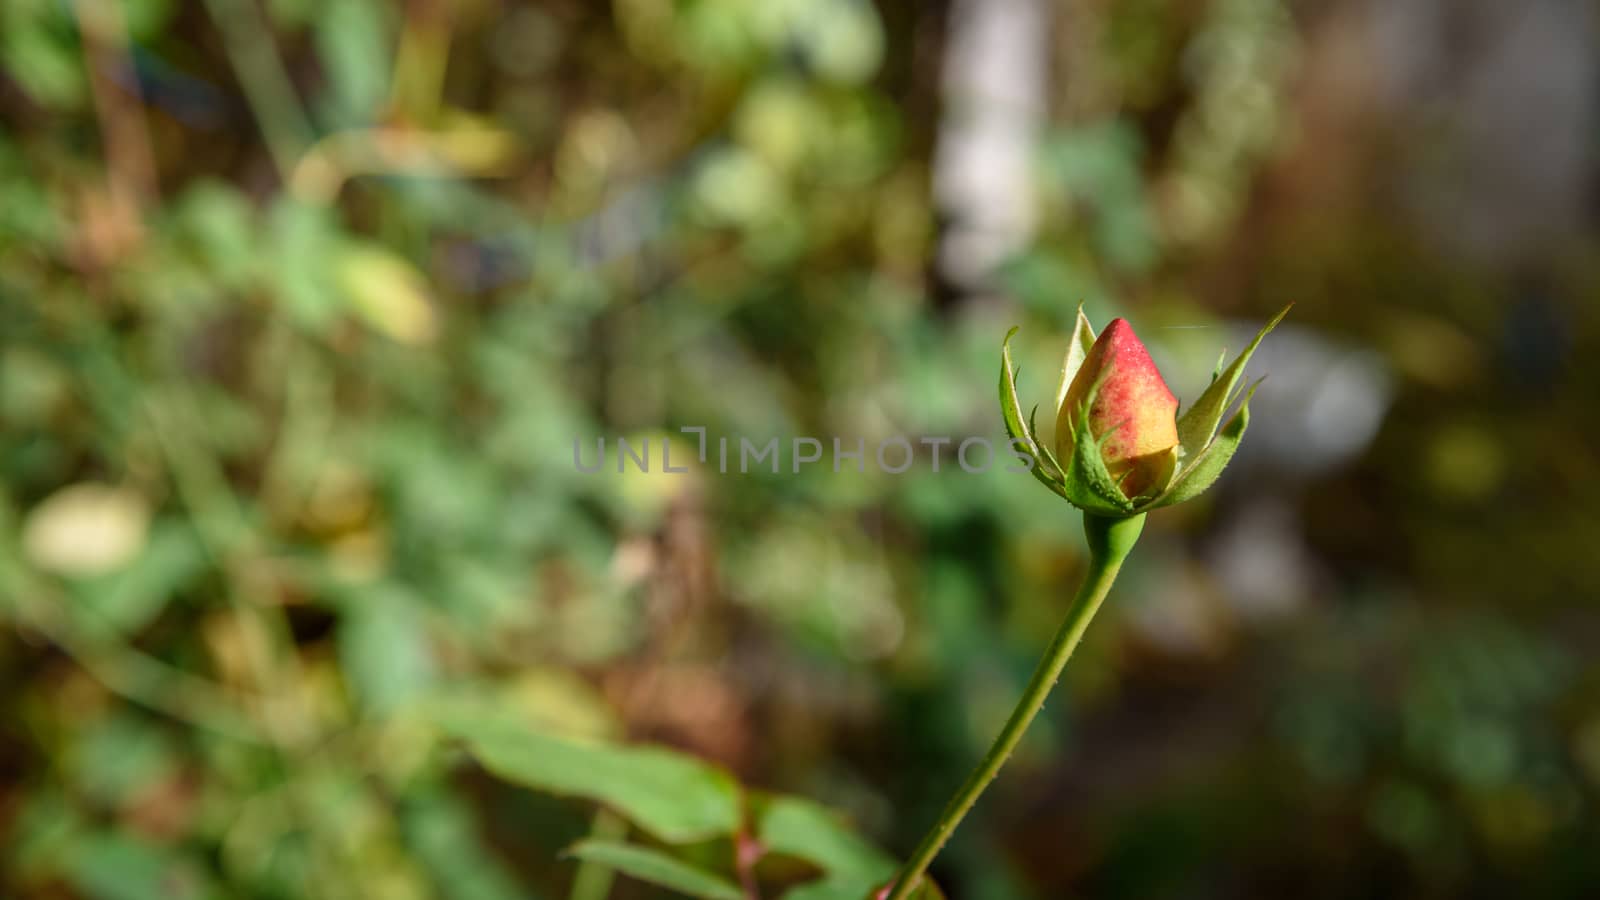 Little Rose Bud in the garden closeup by WolfWilhelm